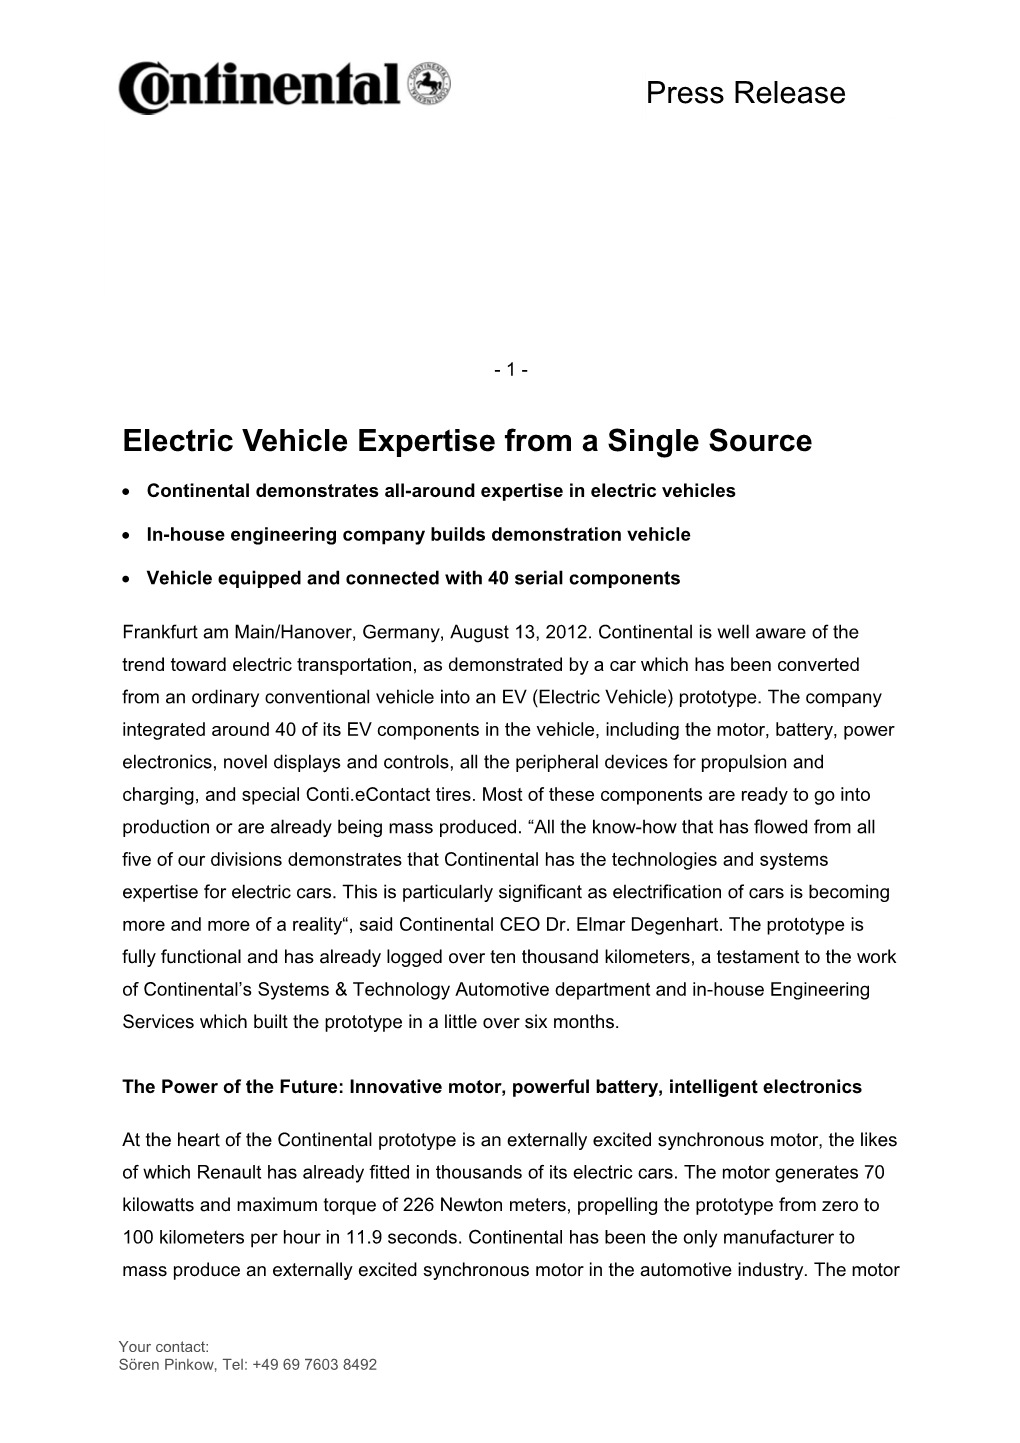 Electricvehicle Expertise from a Single Source